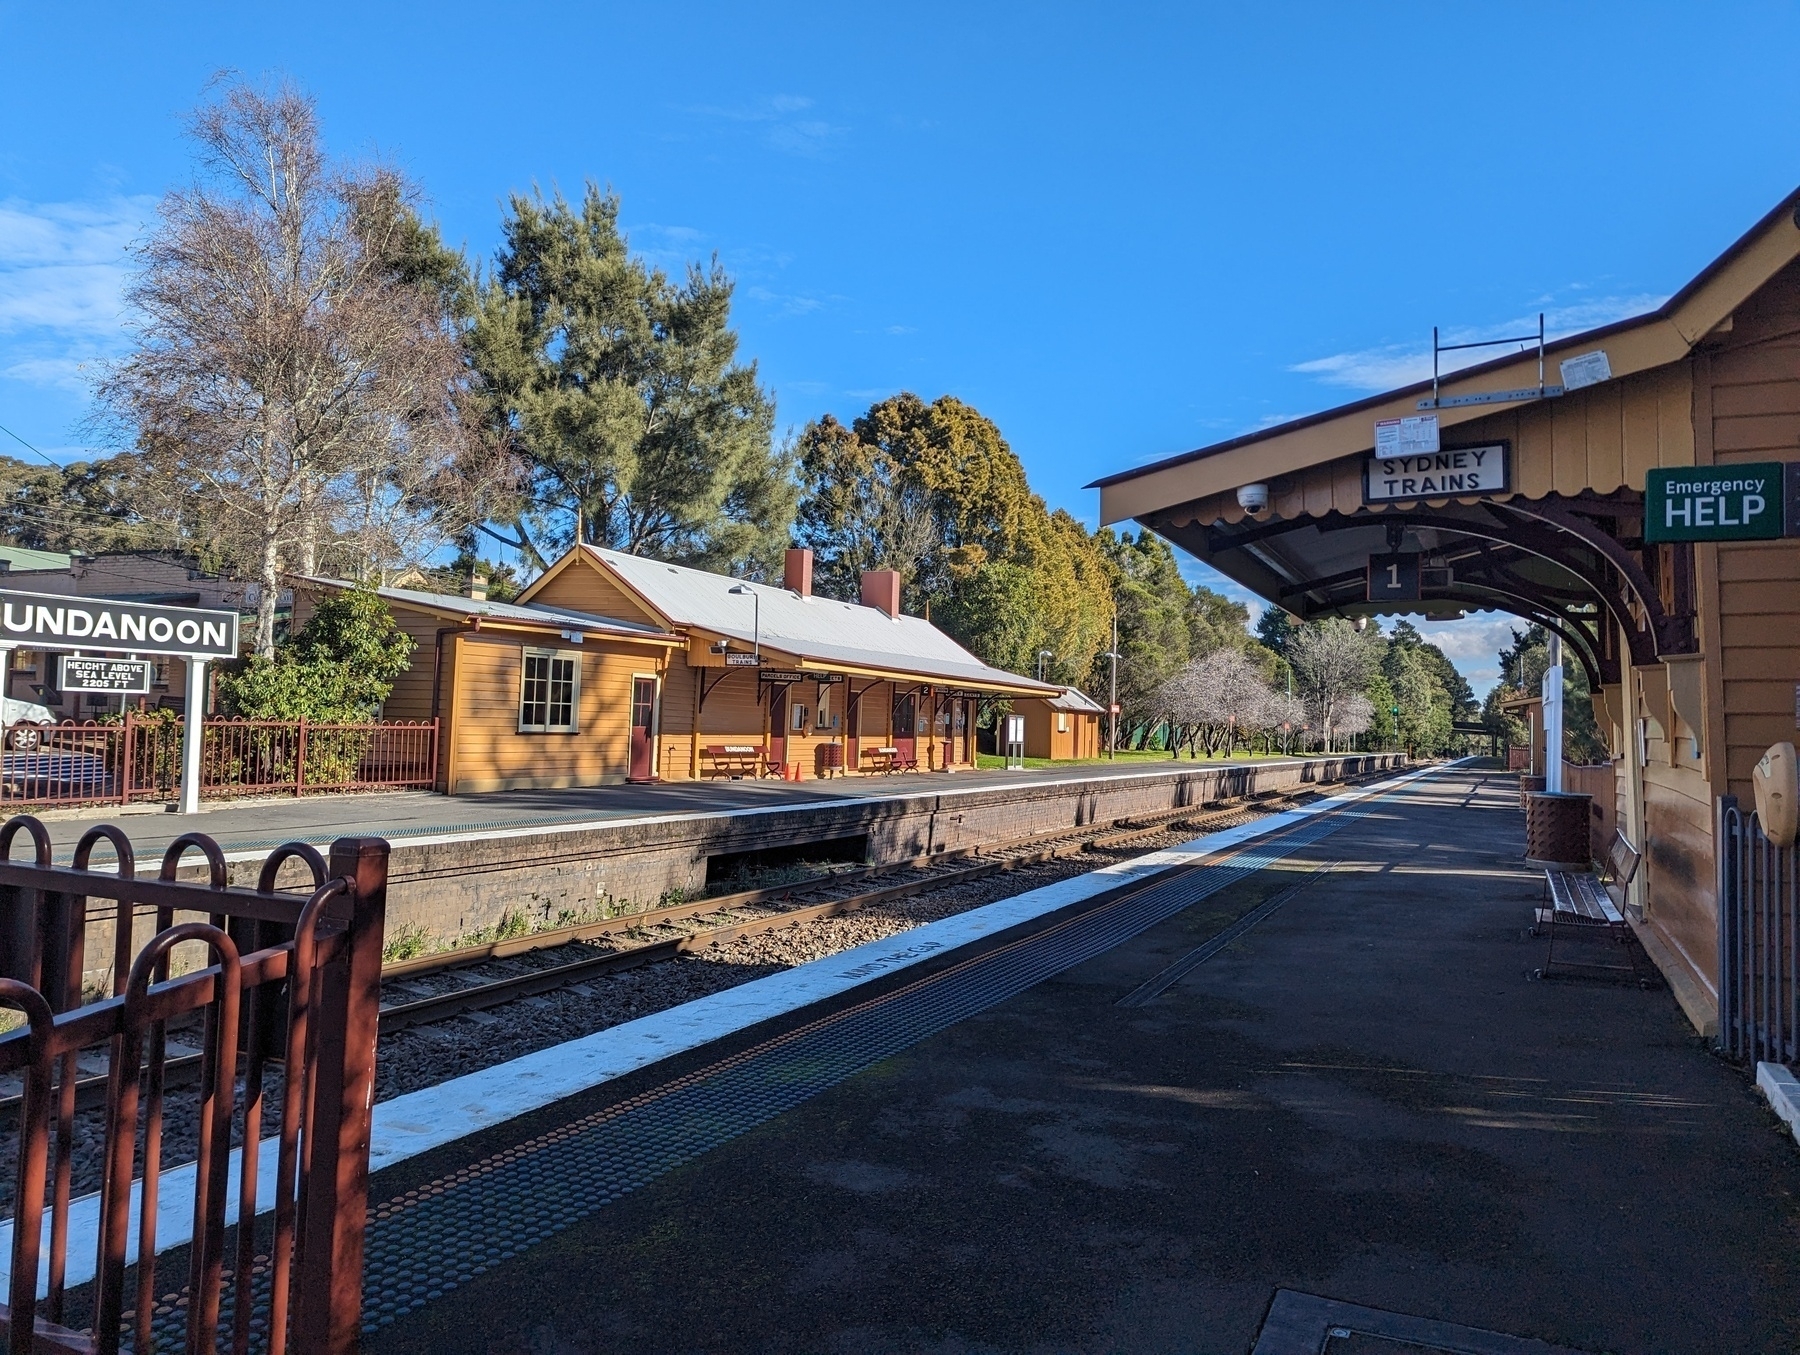 Auto-generated description: A quaint train station platform with a sign that reads Bundanoon is shown, surrounded by trees and blue skies.